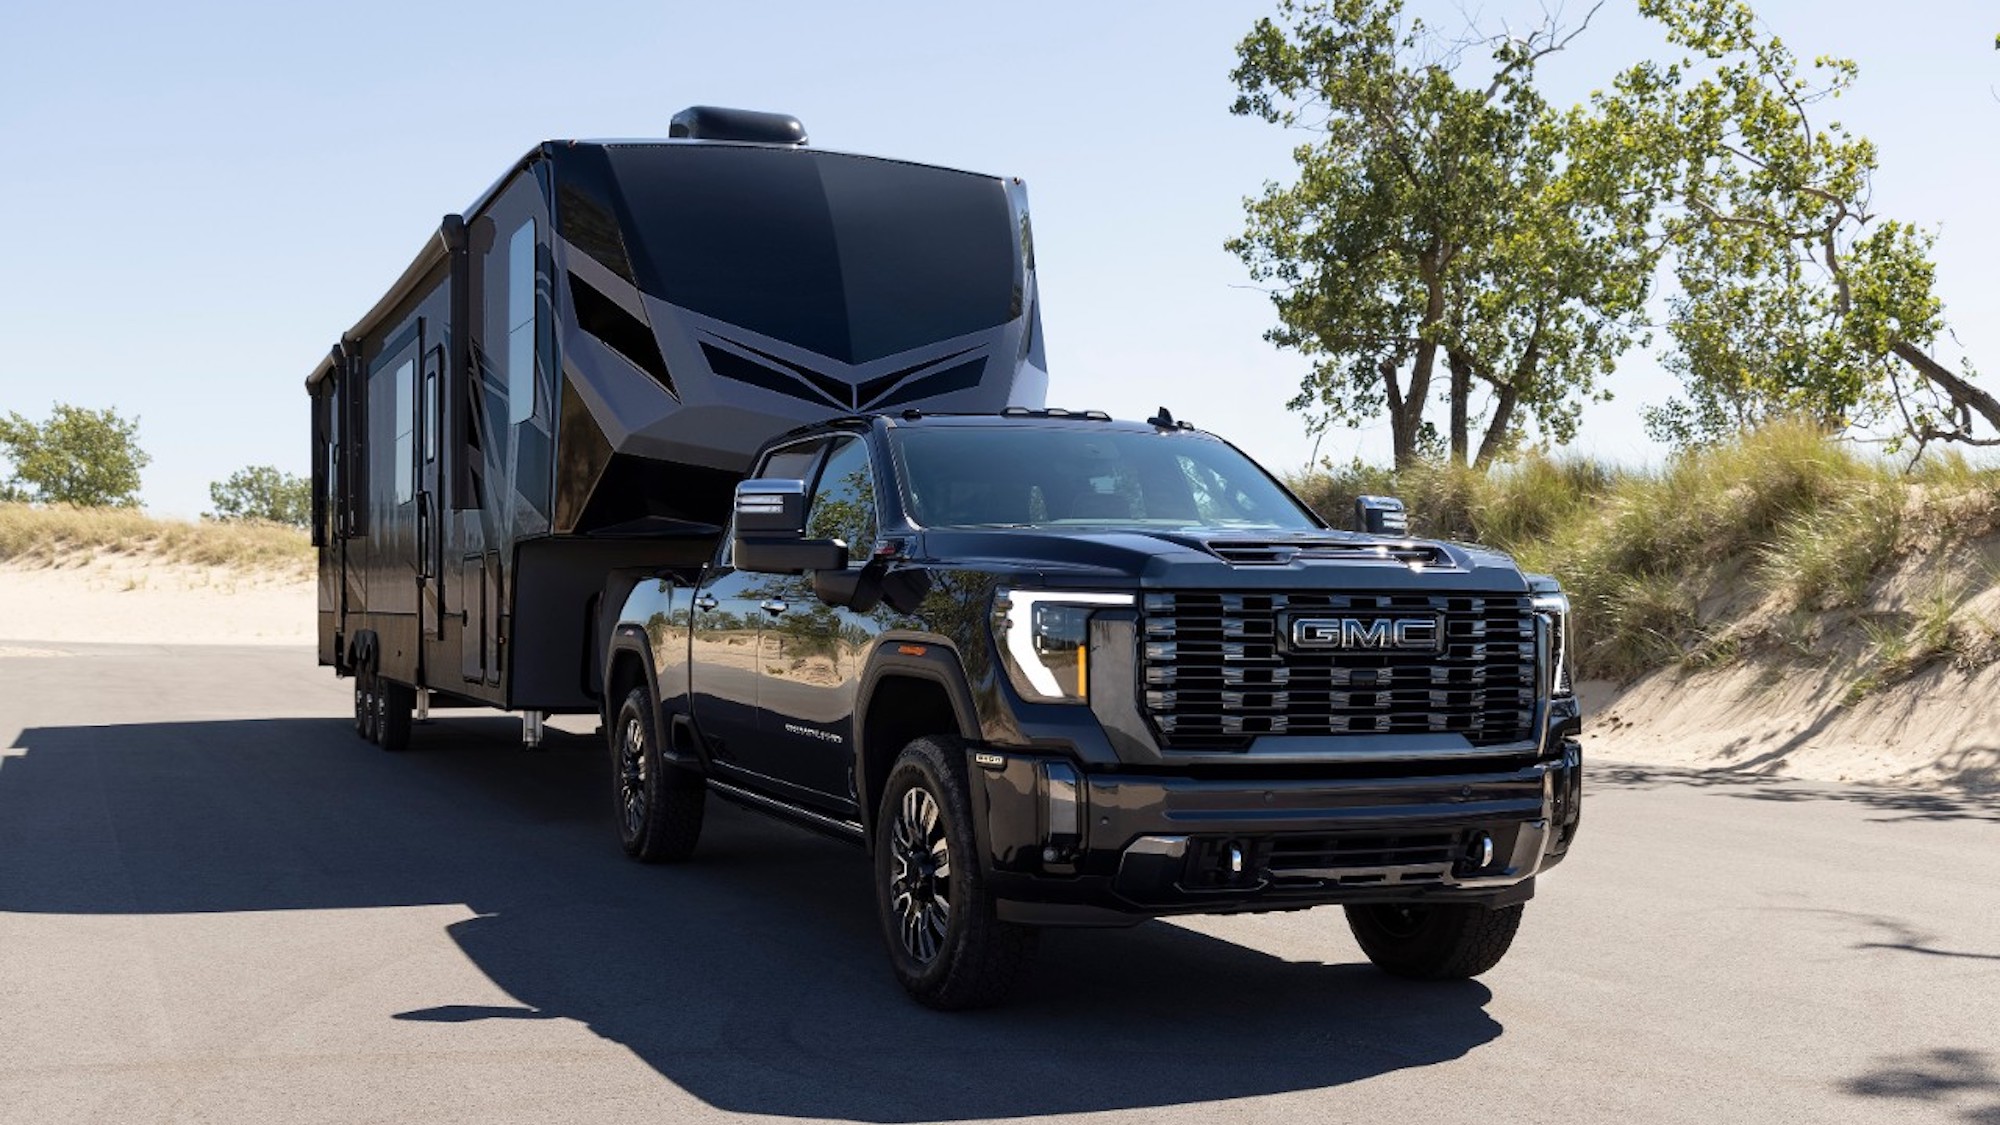 GMC’s new heavy-duty Sierra truck can tow up to twice its own weight